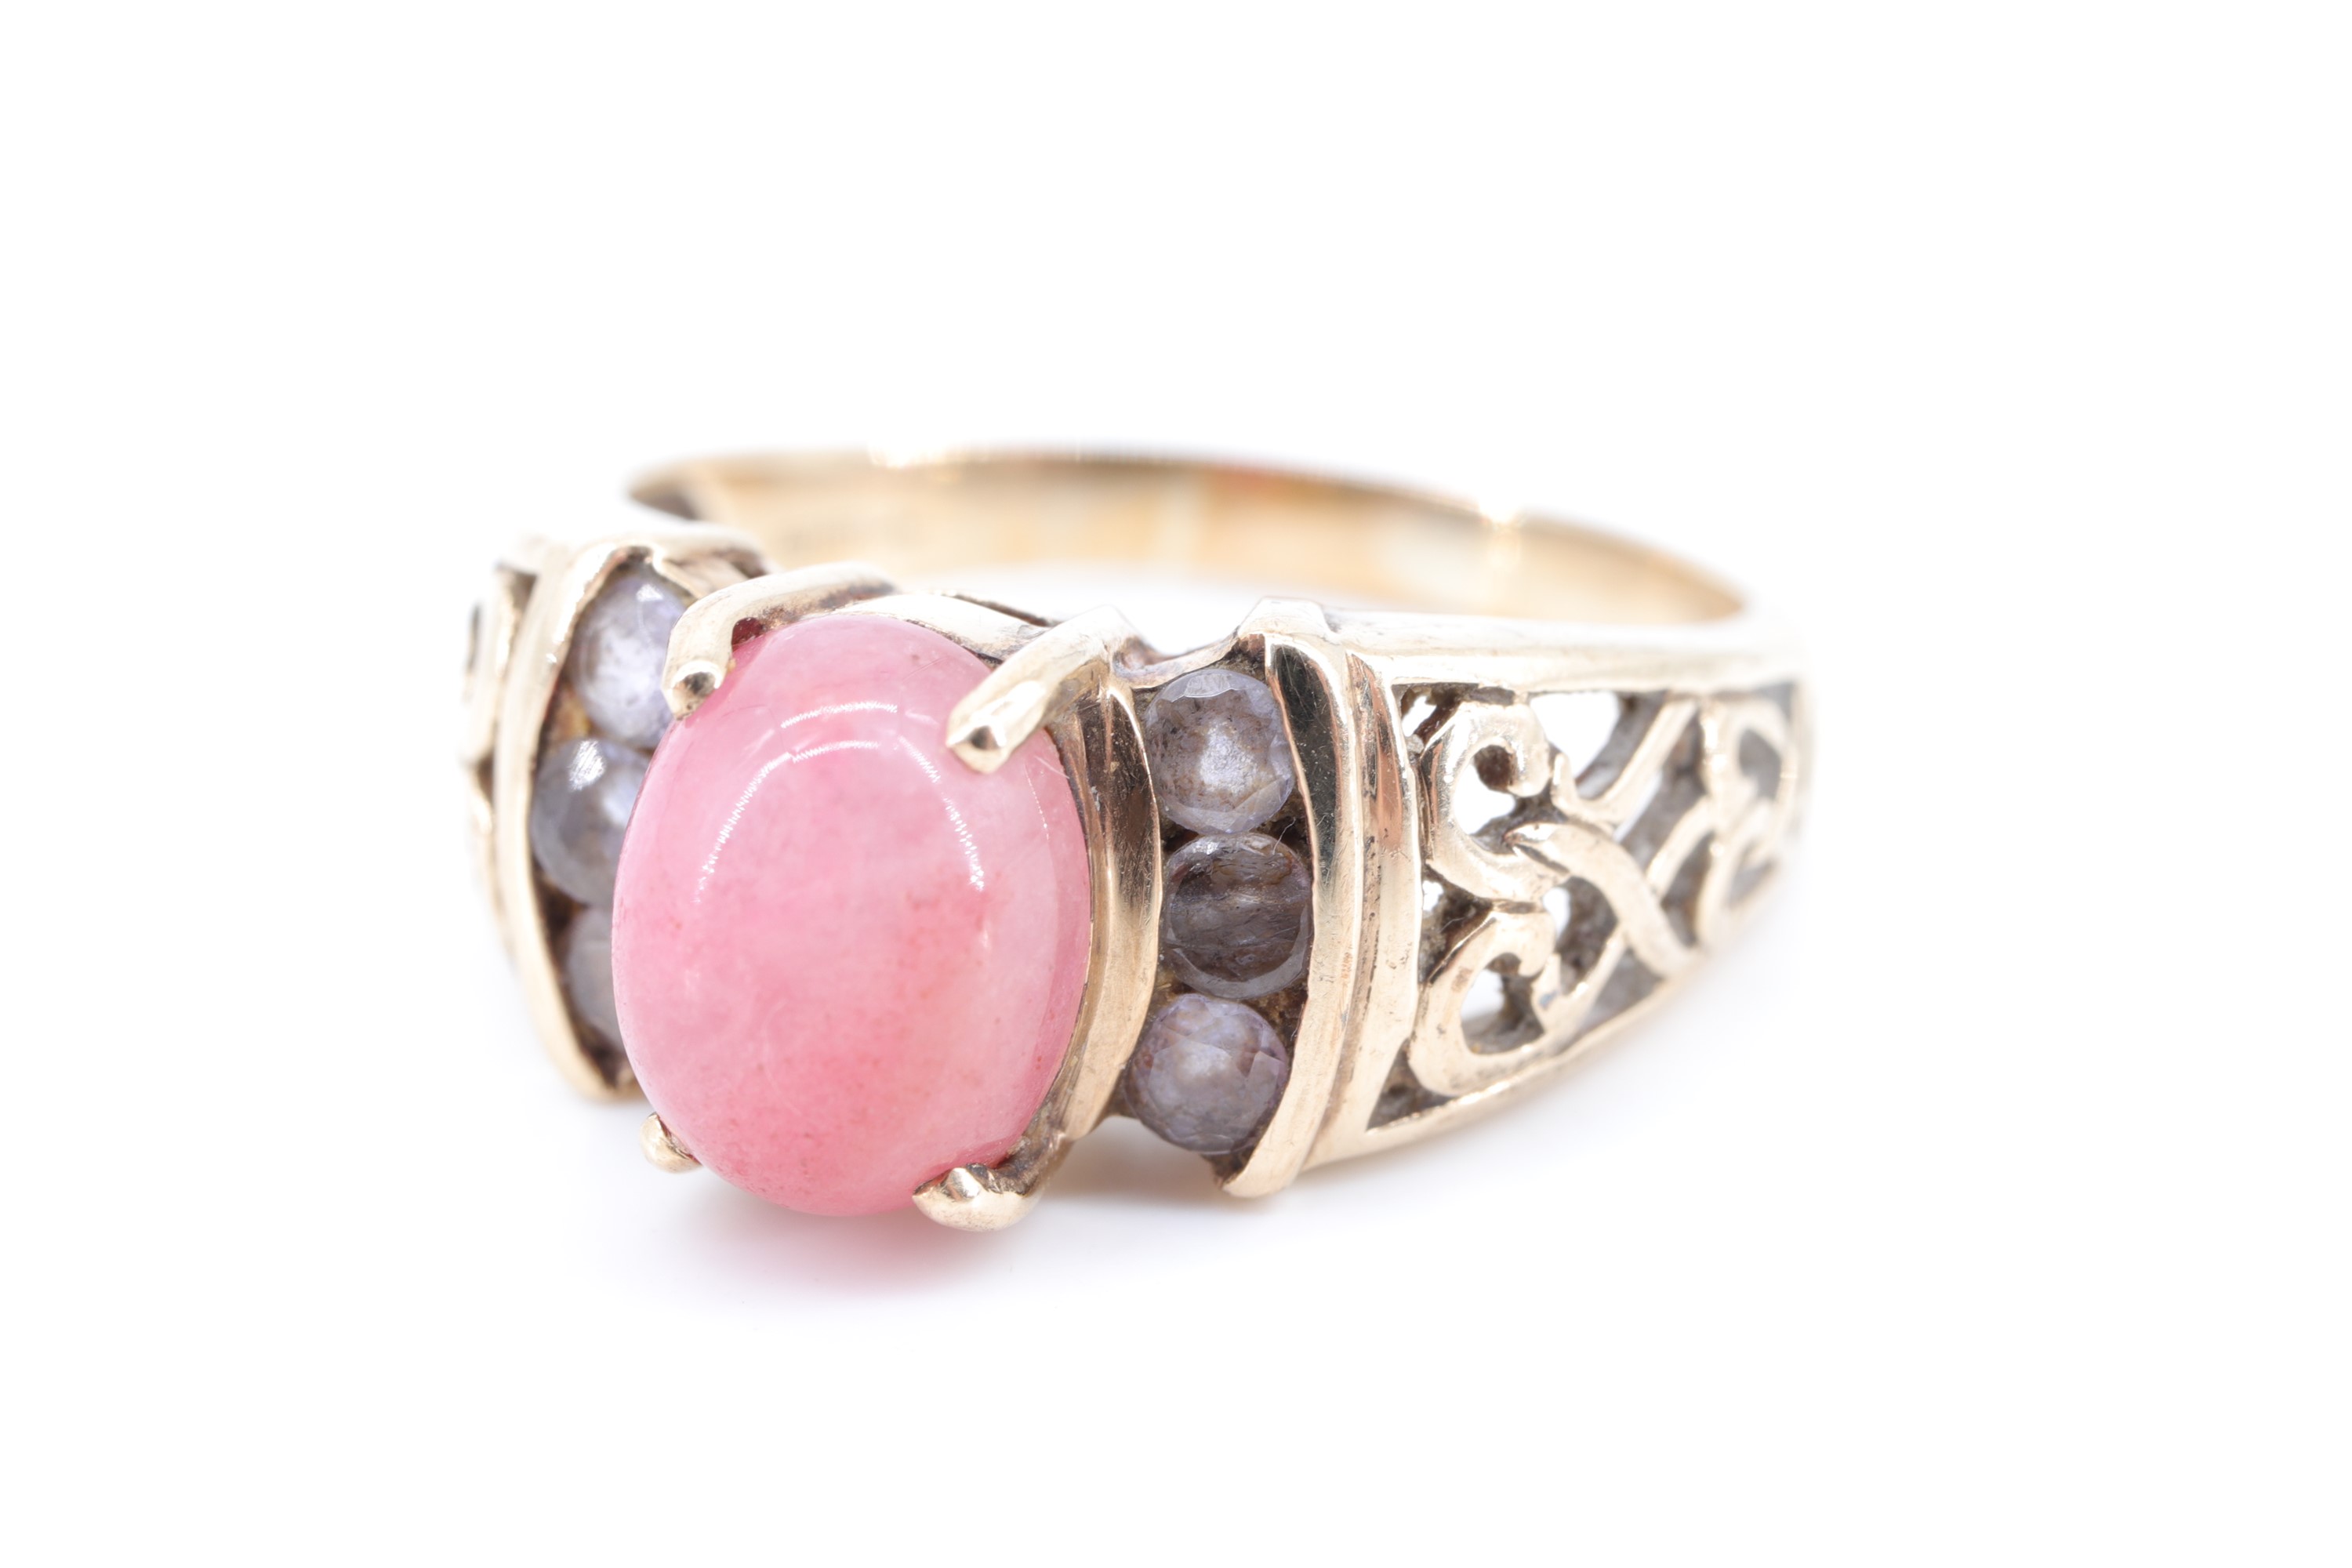 An unusual chalcedony and 9 ct gold dress ring, having an oval chalcedony cabochon transverse set in